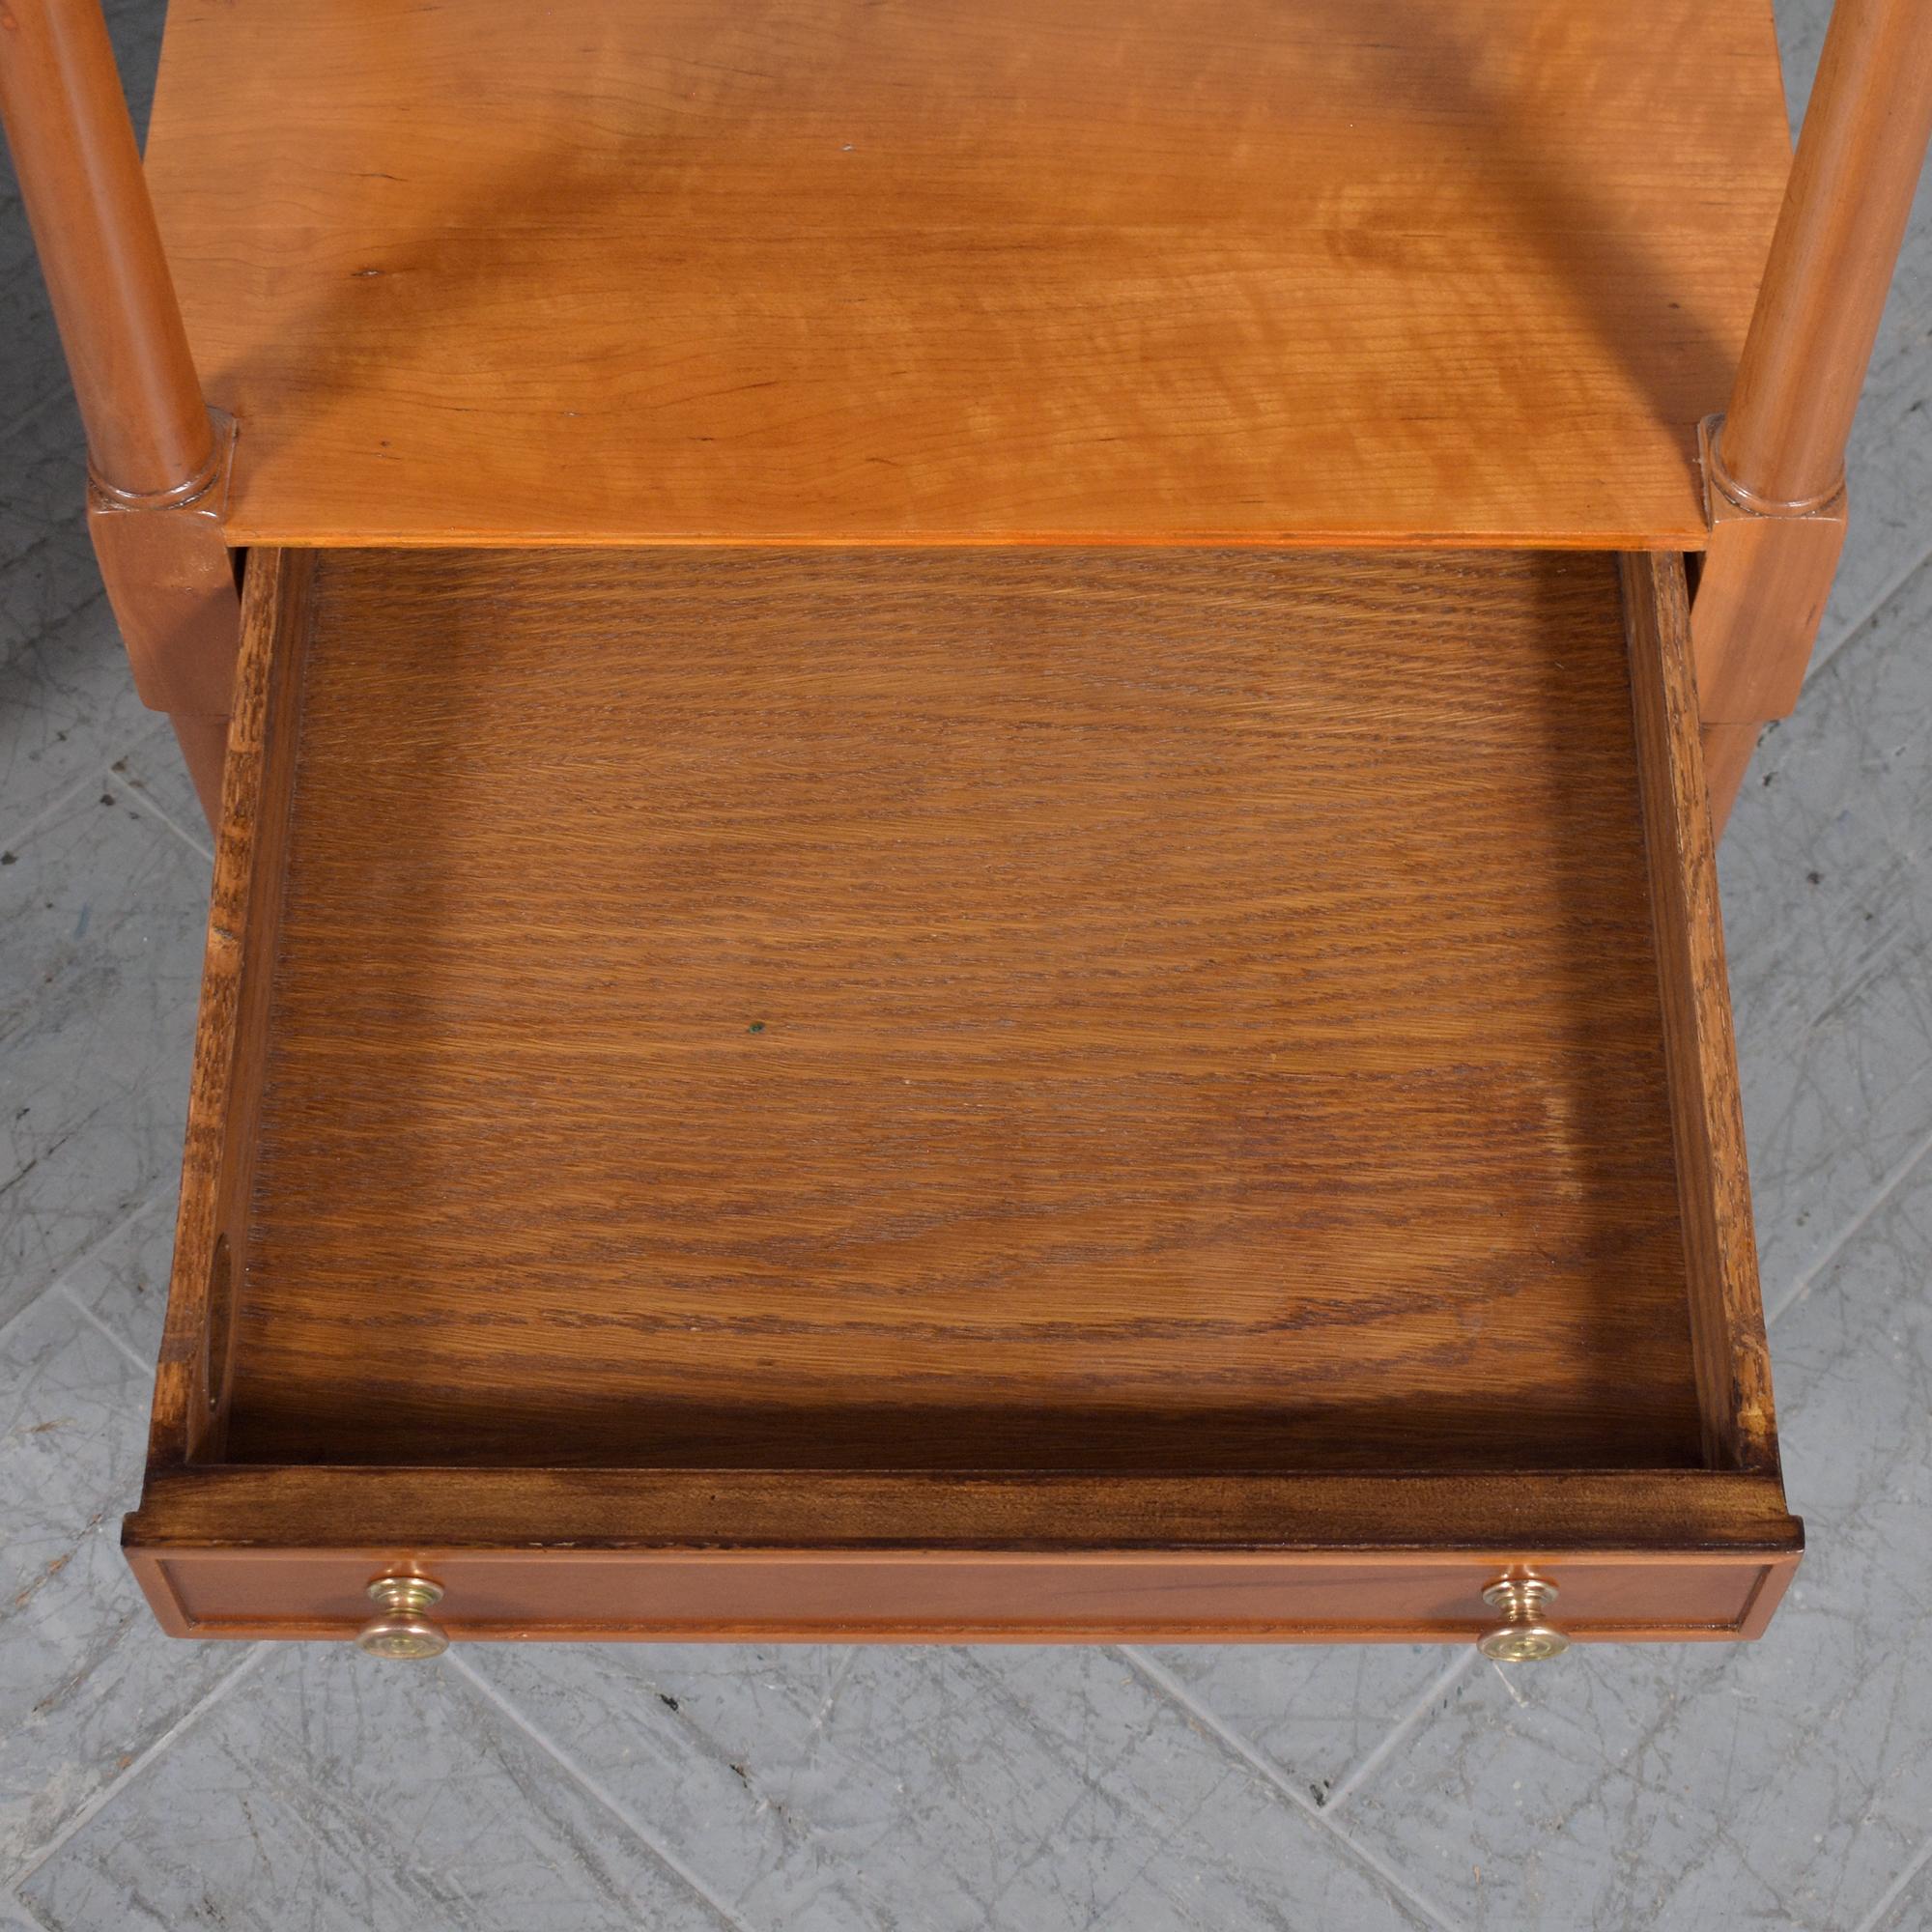 Elegant Handcrafted Maple Bedside Tables with Brass Handles and Tapered Legs In Good Condition For Sale In Los Angeles, CA